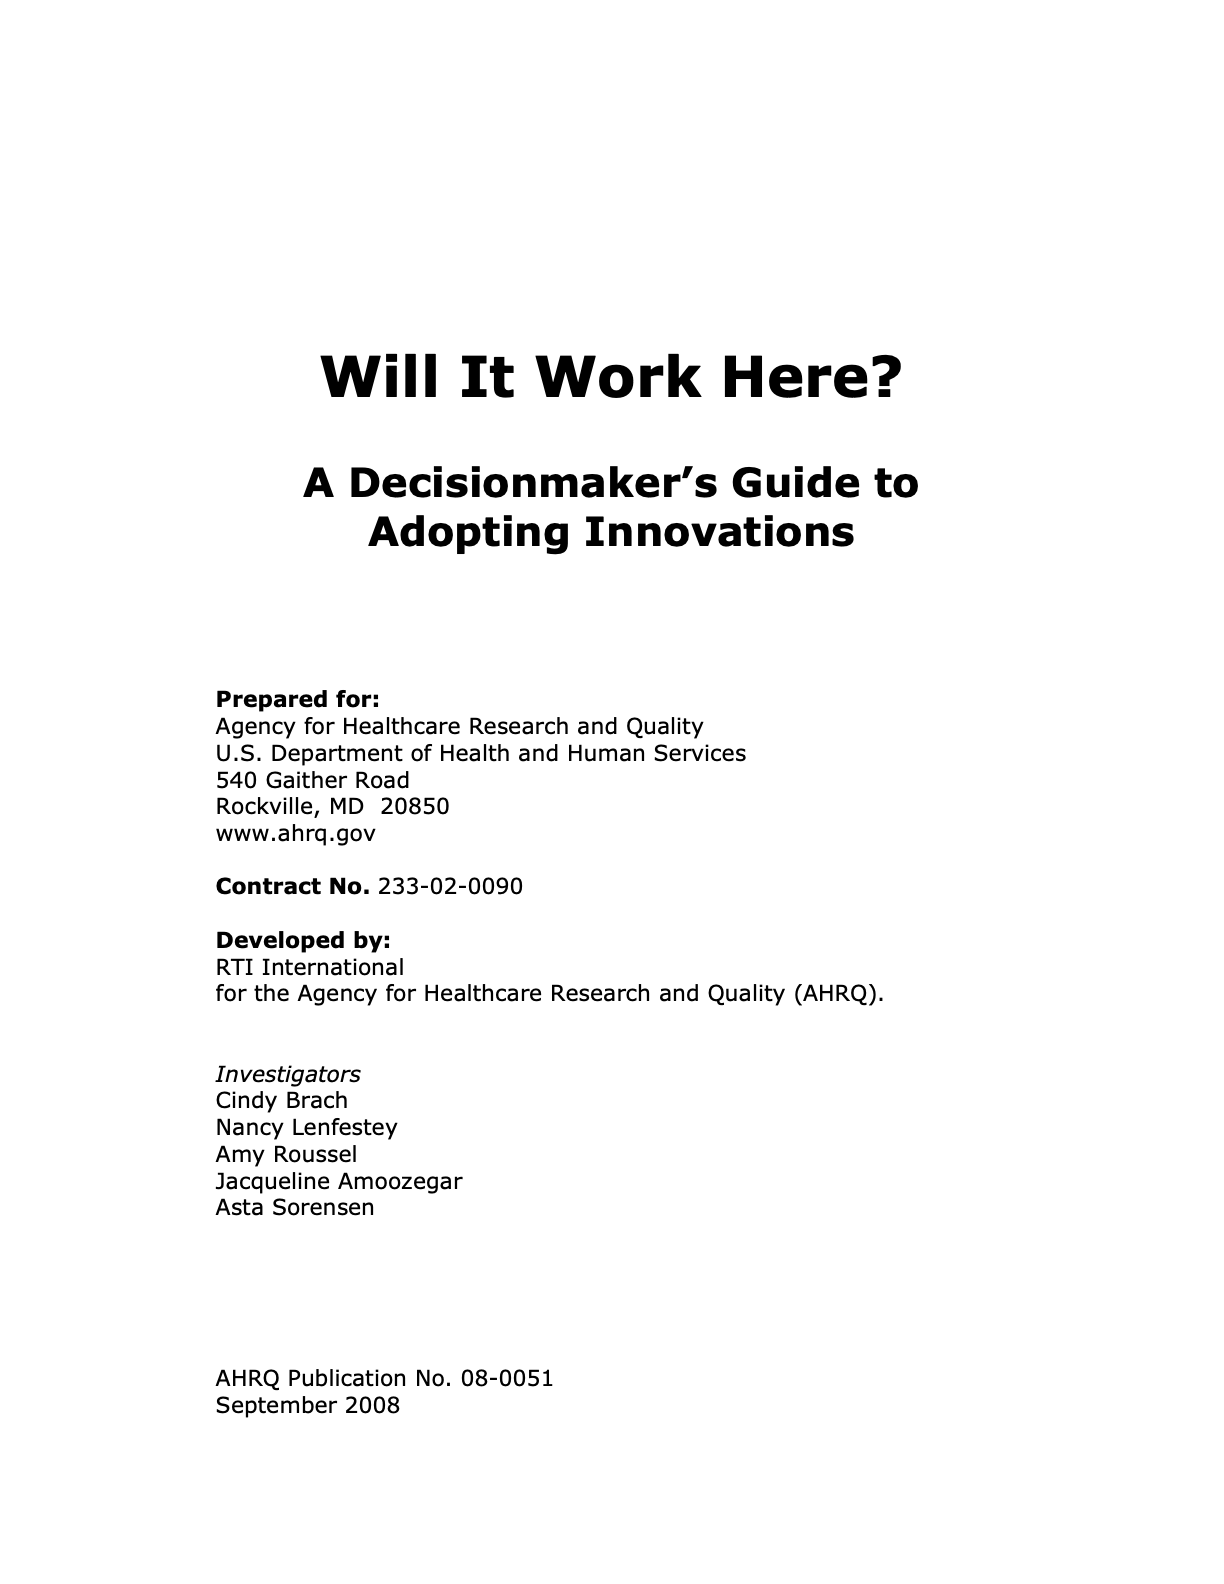 Will It Work Here? A Decisionmaker's Guide to Adopting Innovations